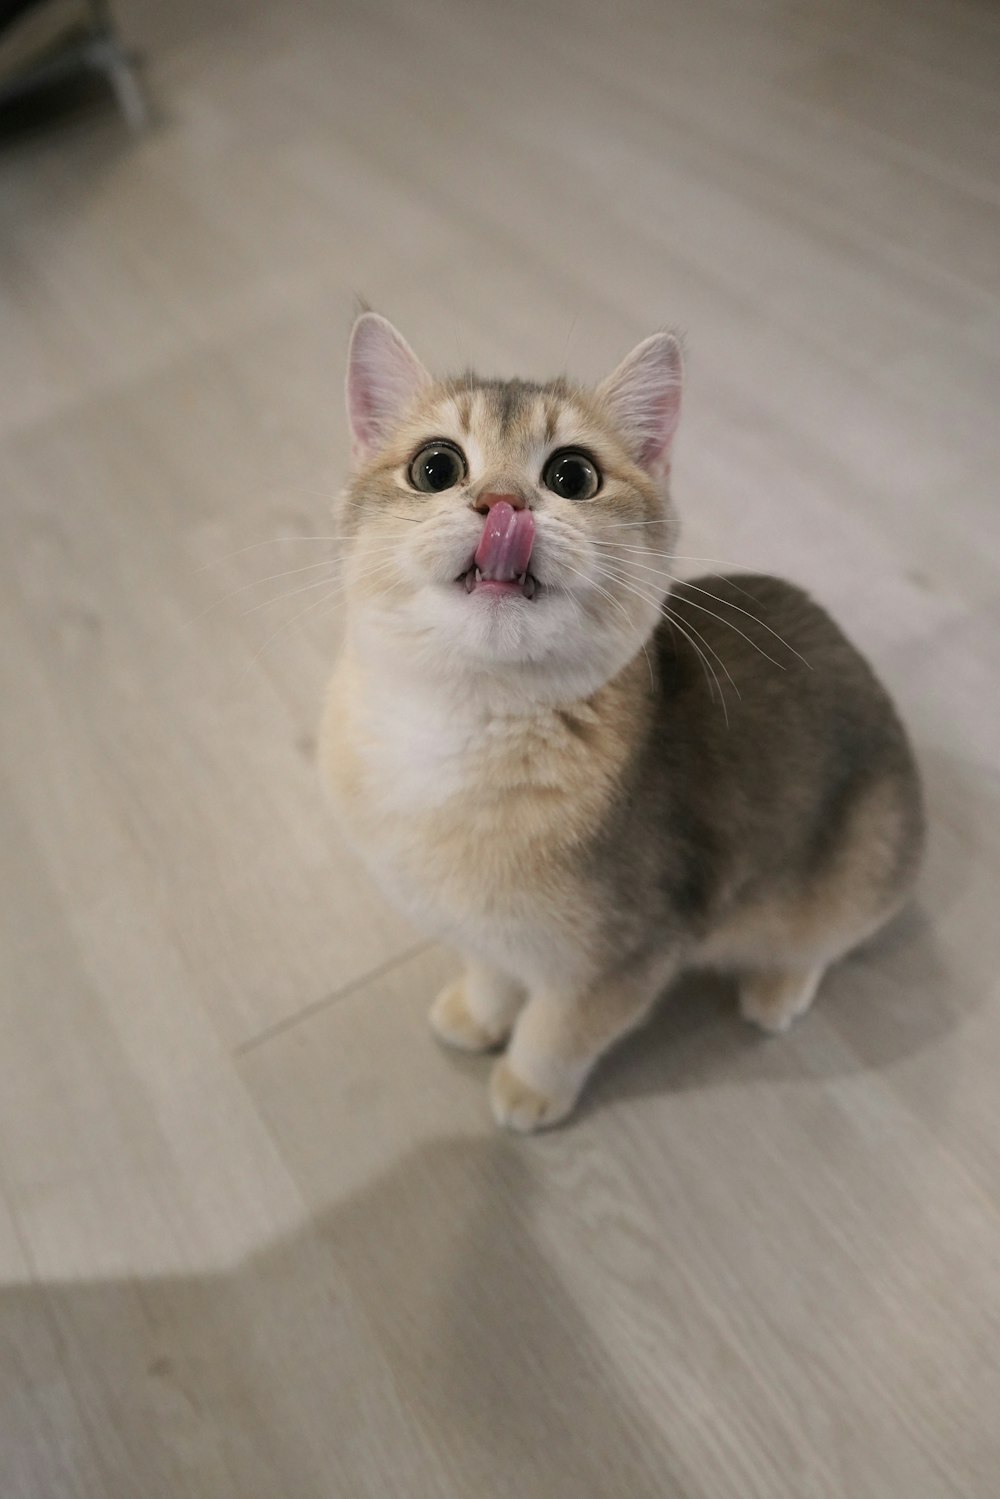 a cat sitting on the floor making a funny face